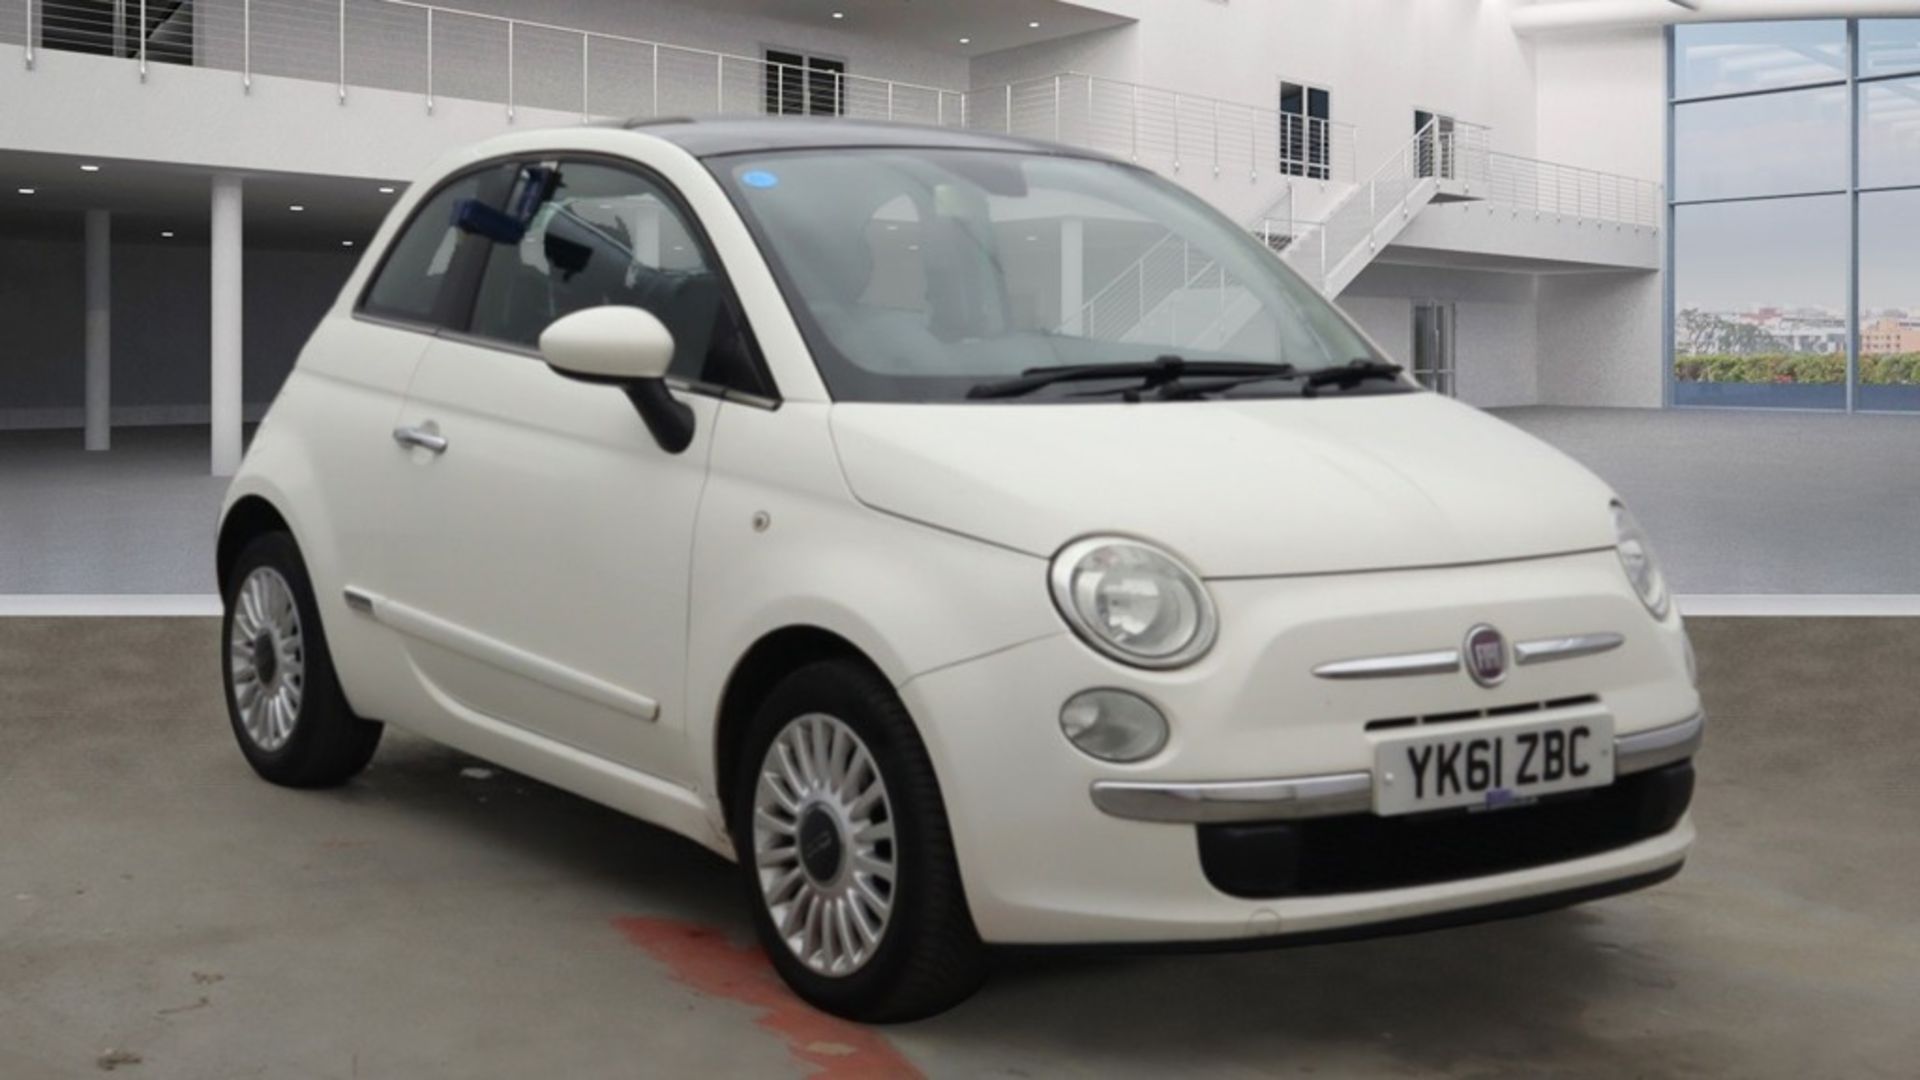 ** ON SALE ** Fiat 500 Lounge 1.3 2011 '61 Reg' A/C - Panoramic Roof - Only 89,590 Miles - No Vat